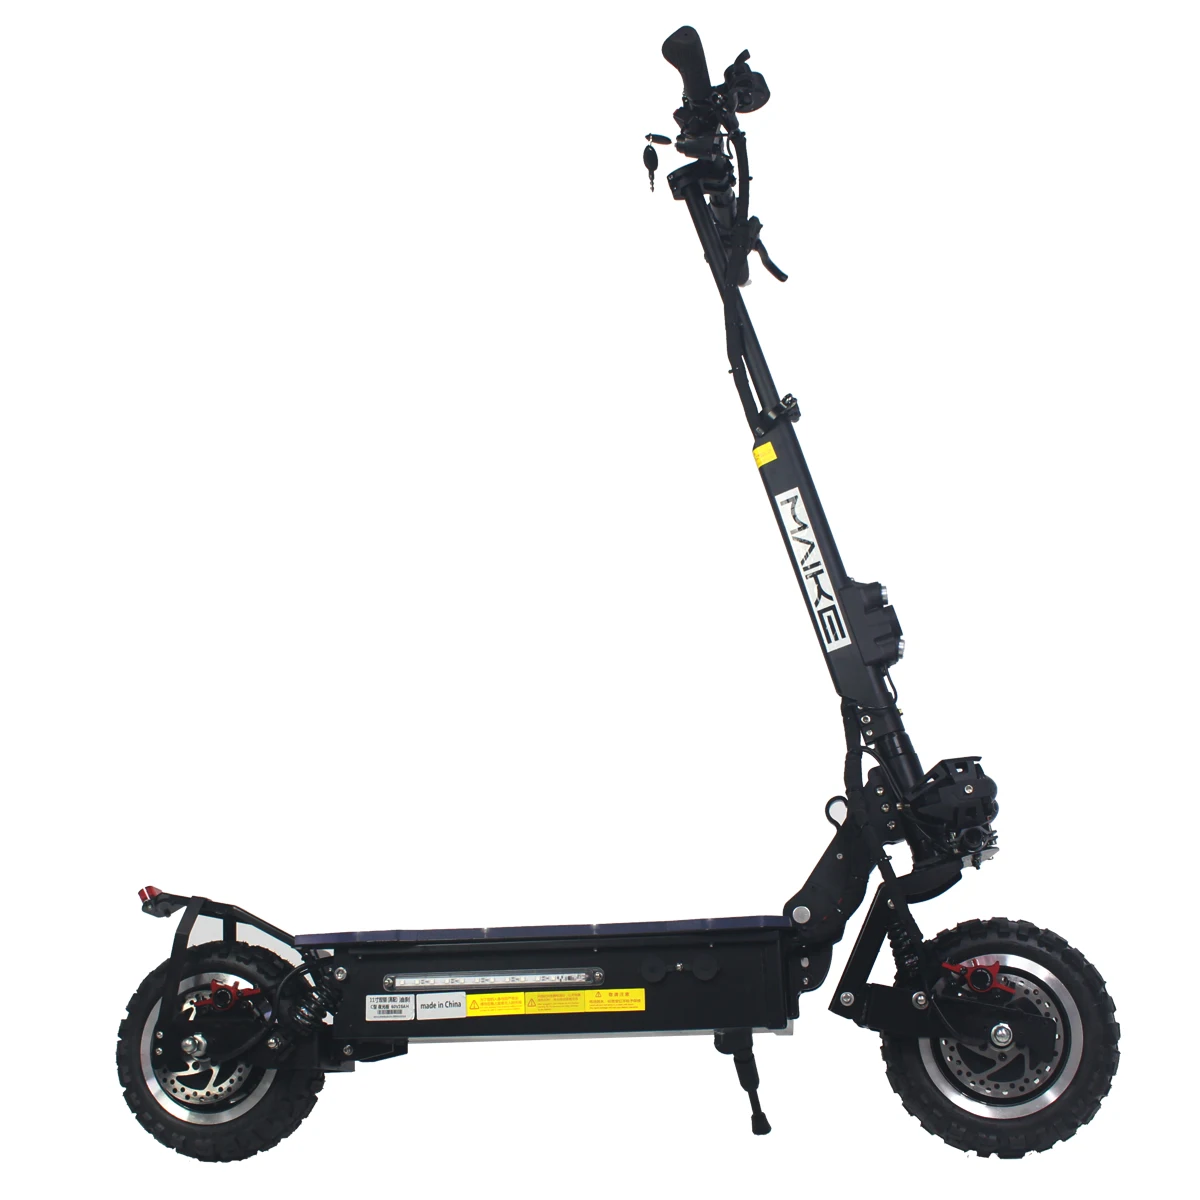 

China Cheap price maike kk4s 11 inch big wheel dual motor 3200w high speed 50mph off road fast electric kick scooters